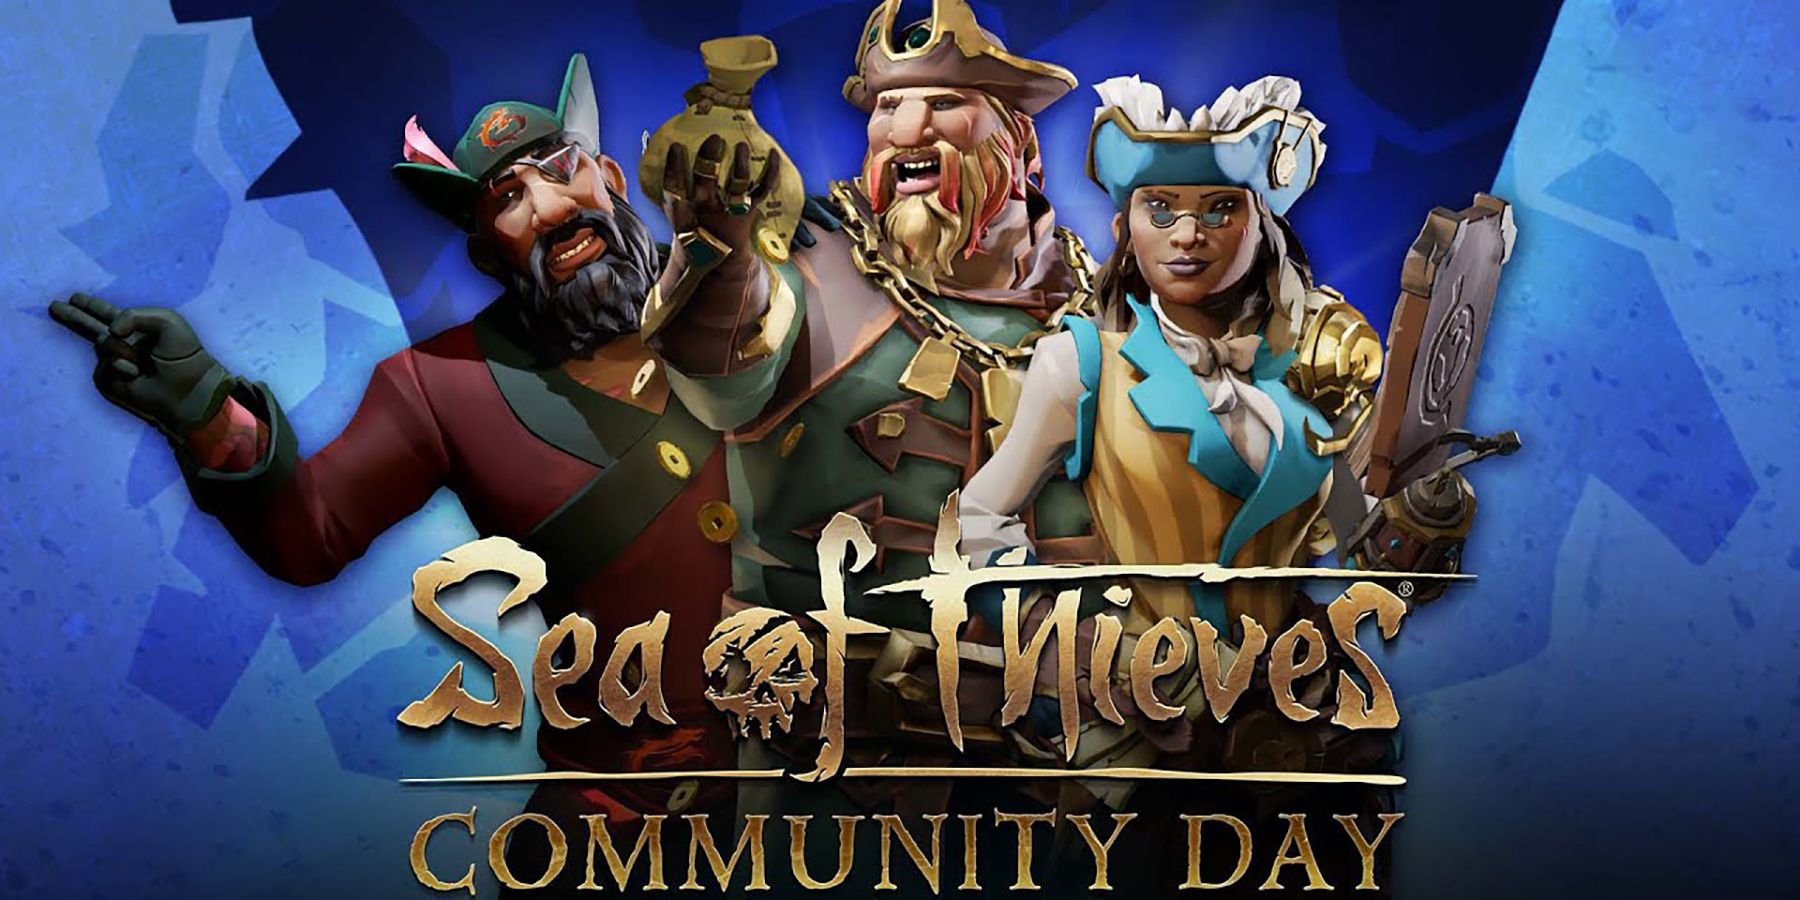 Sea of Thieves Executive Producer Discusses Community Day